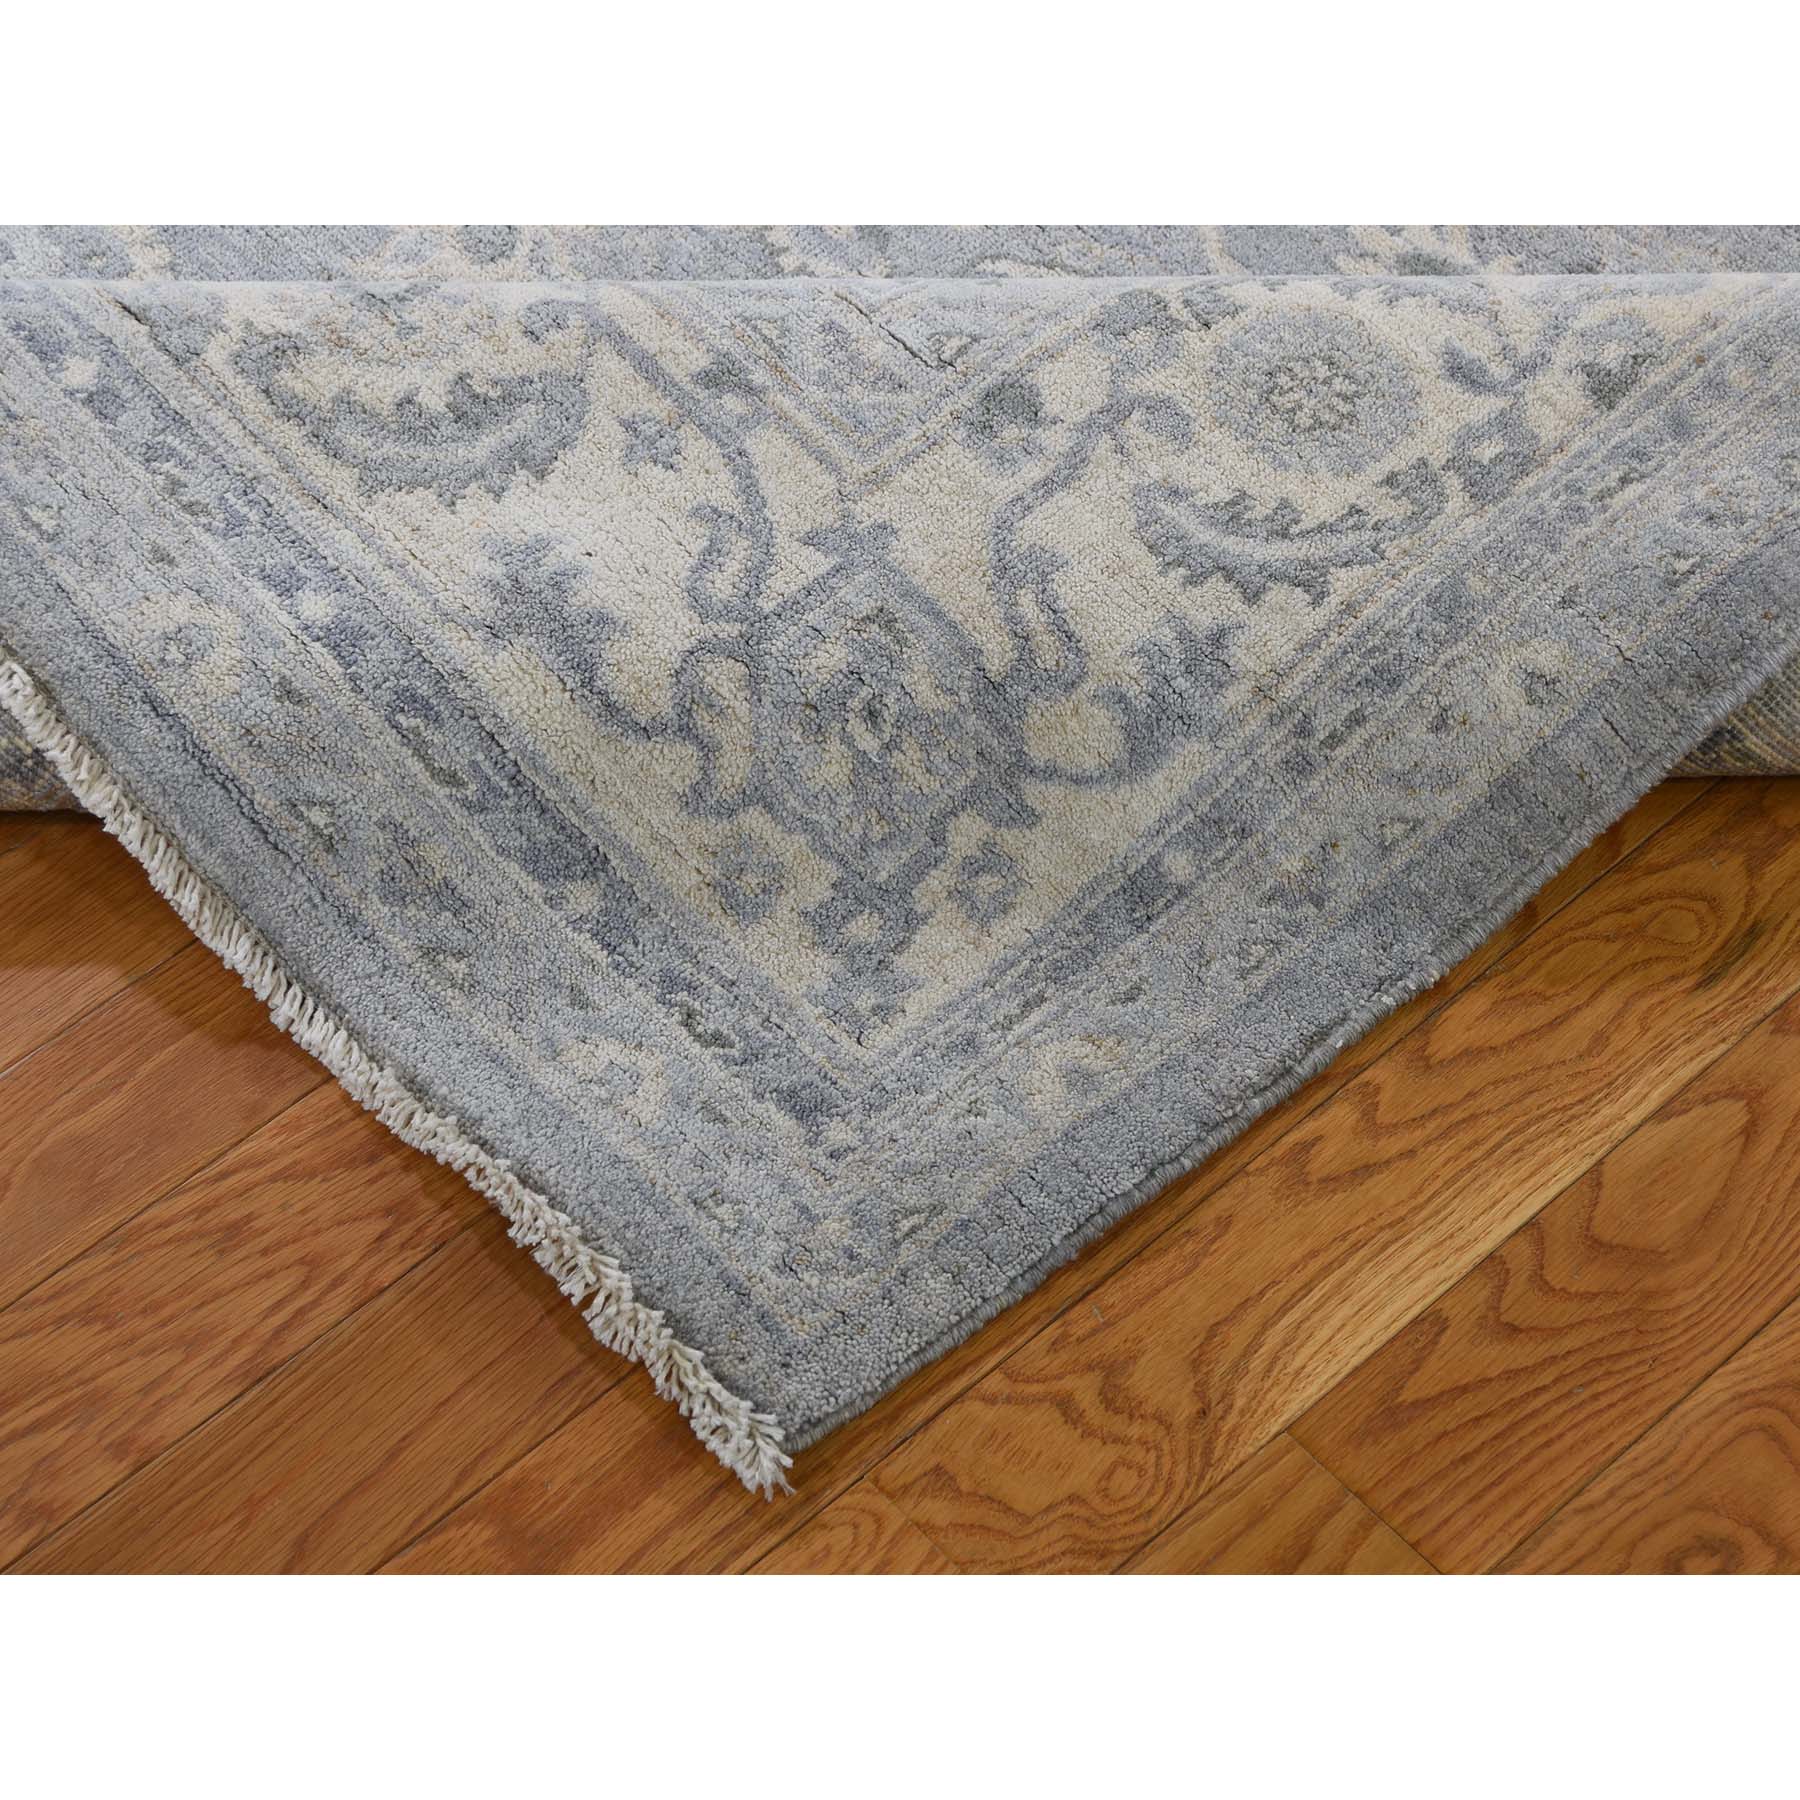 8-4 x9-10  Silver Wash Peshawar With Mahal Design Hand-Knotted Oriental Rug 